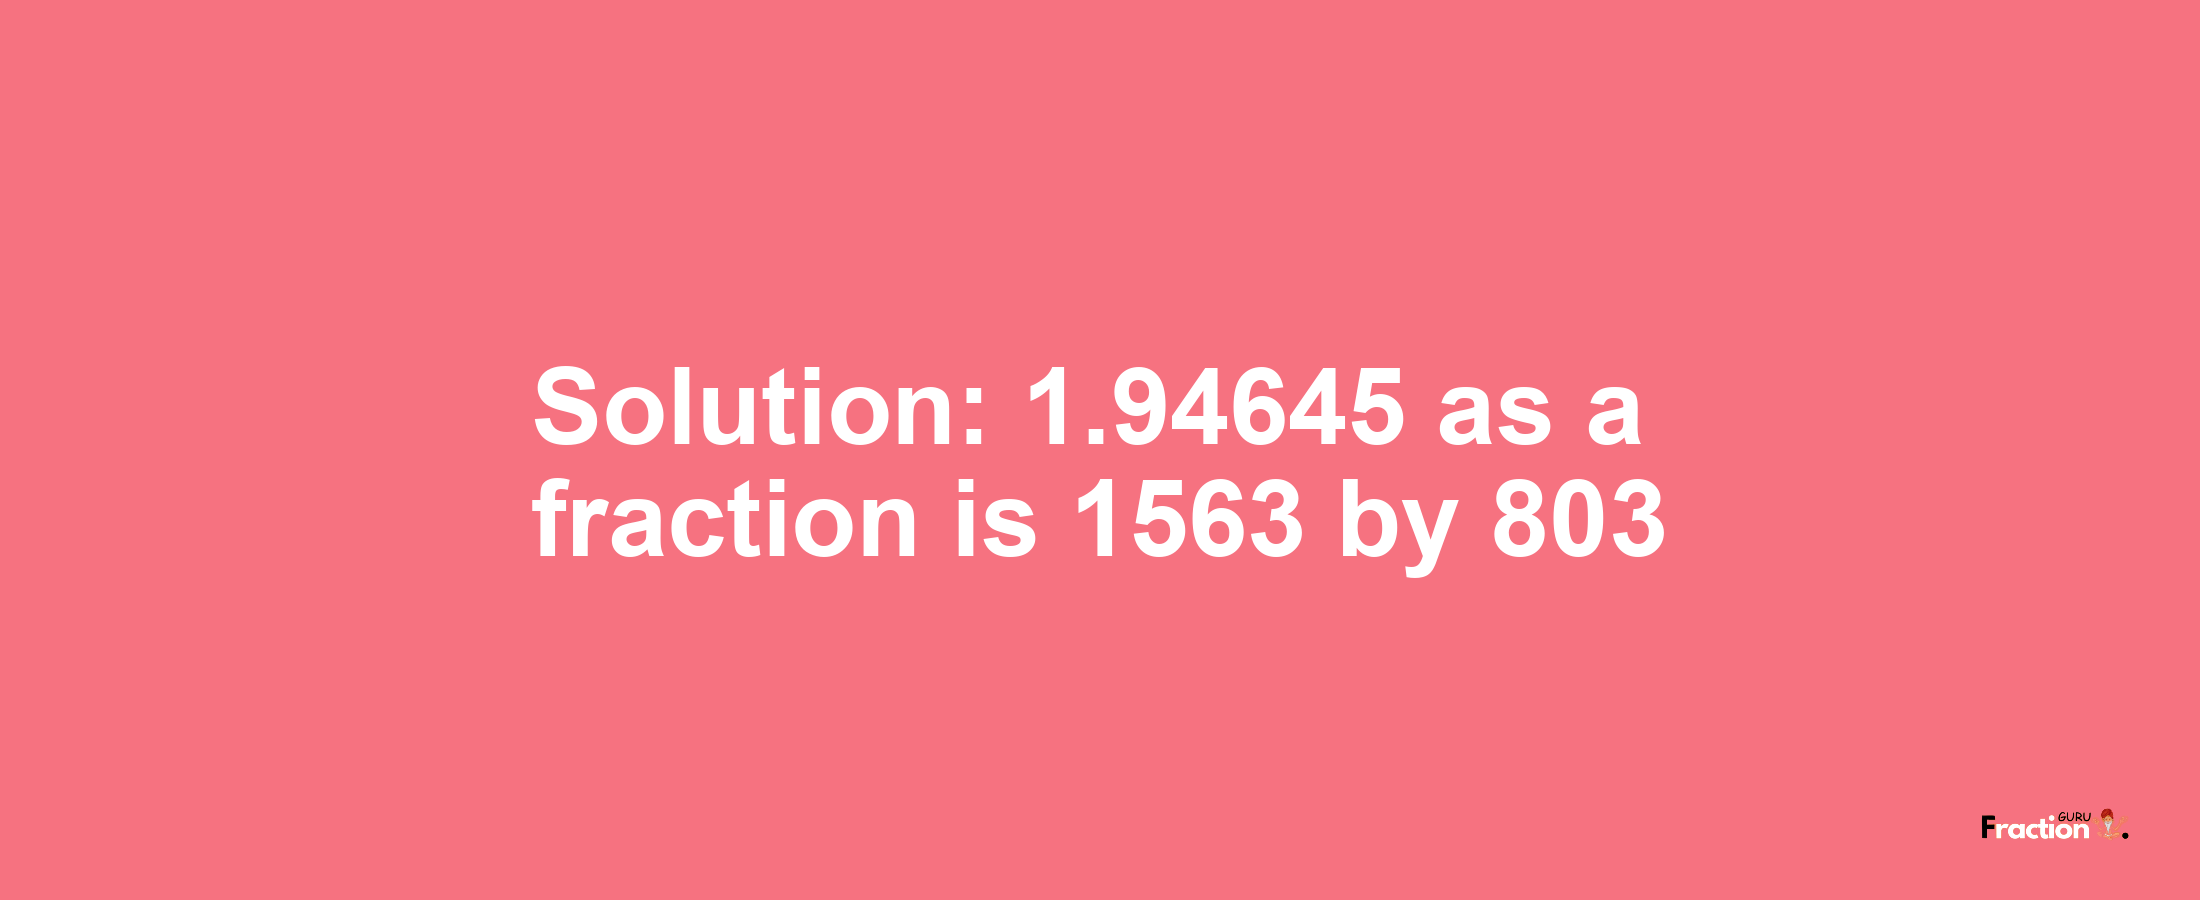 Solution:1.94645 as a fraction is 1563/803